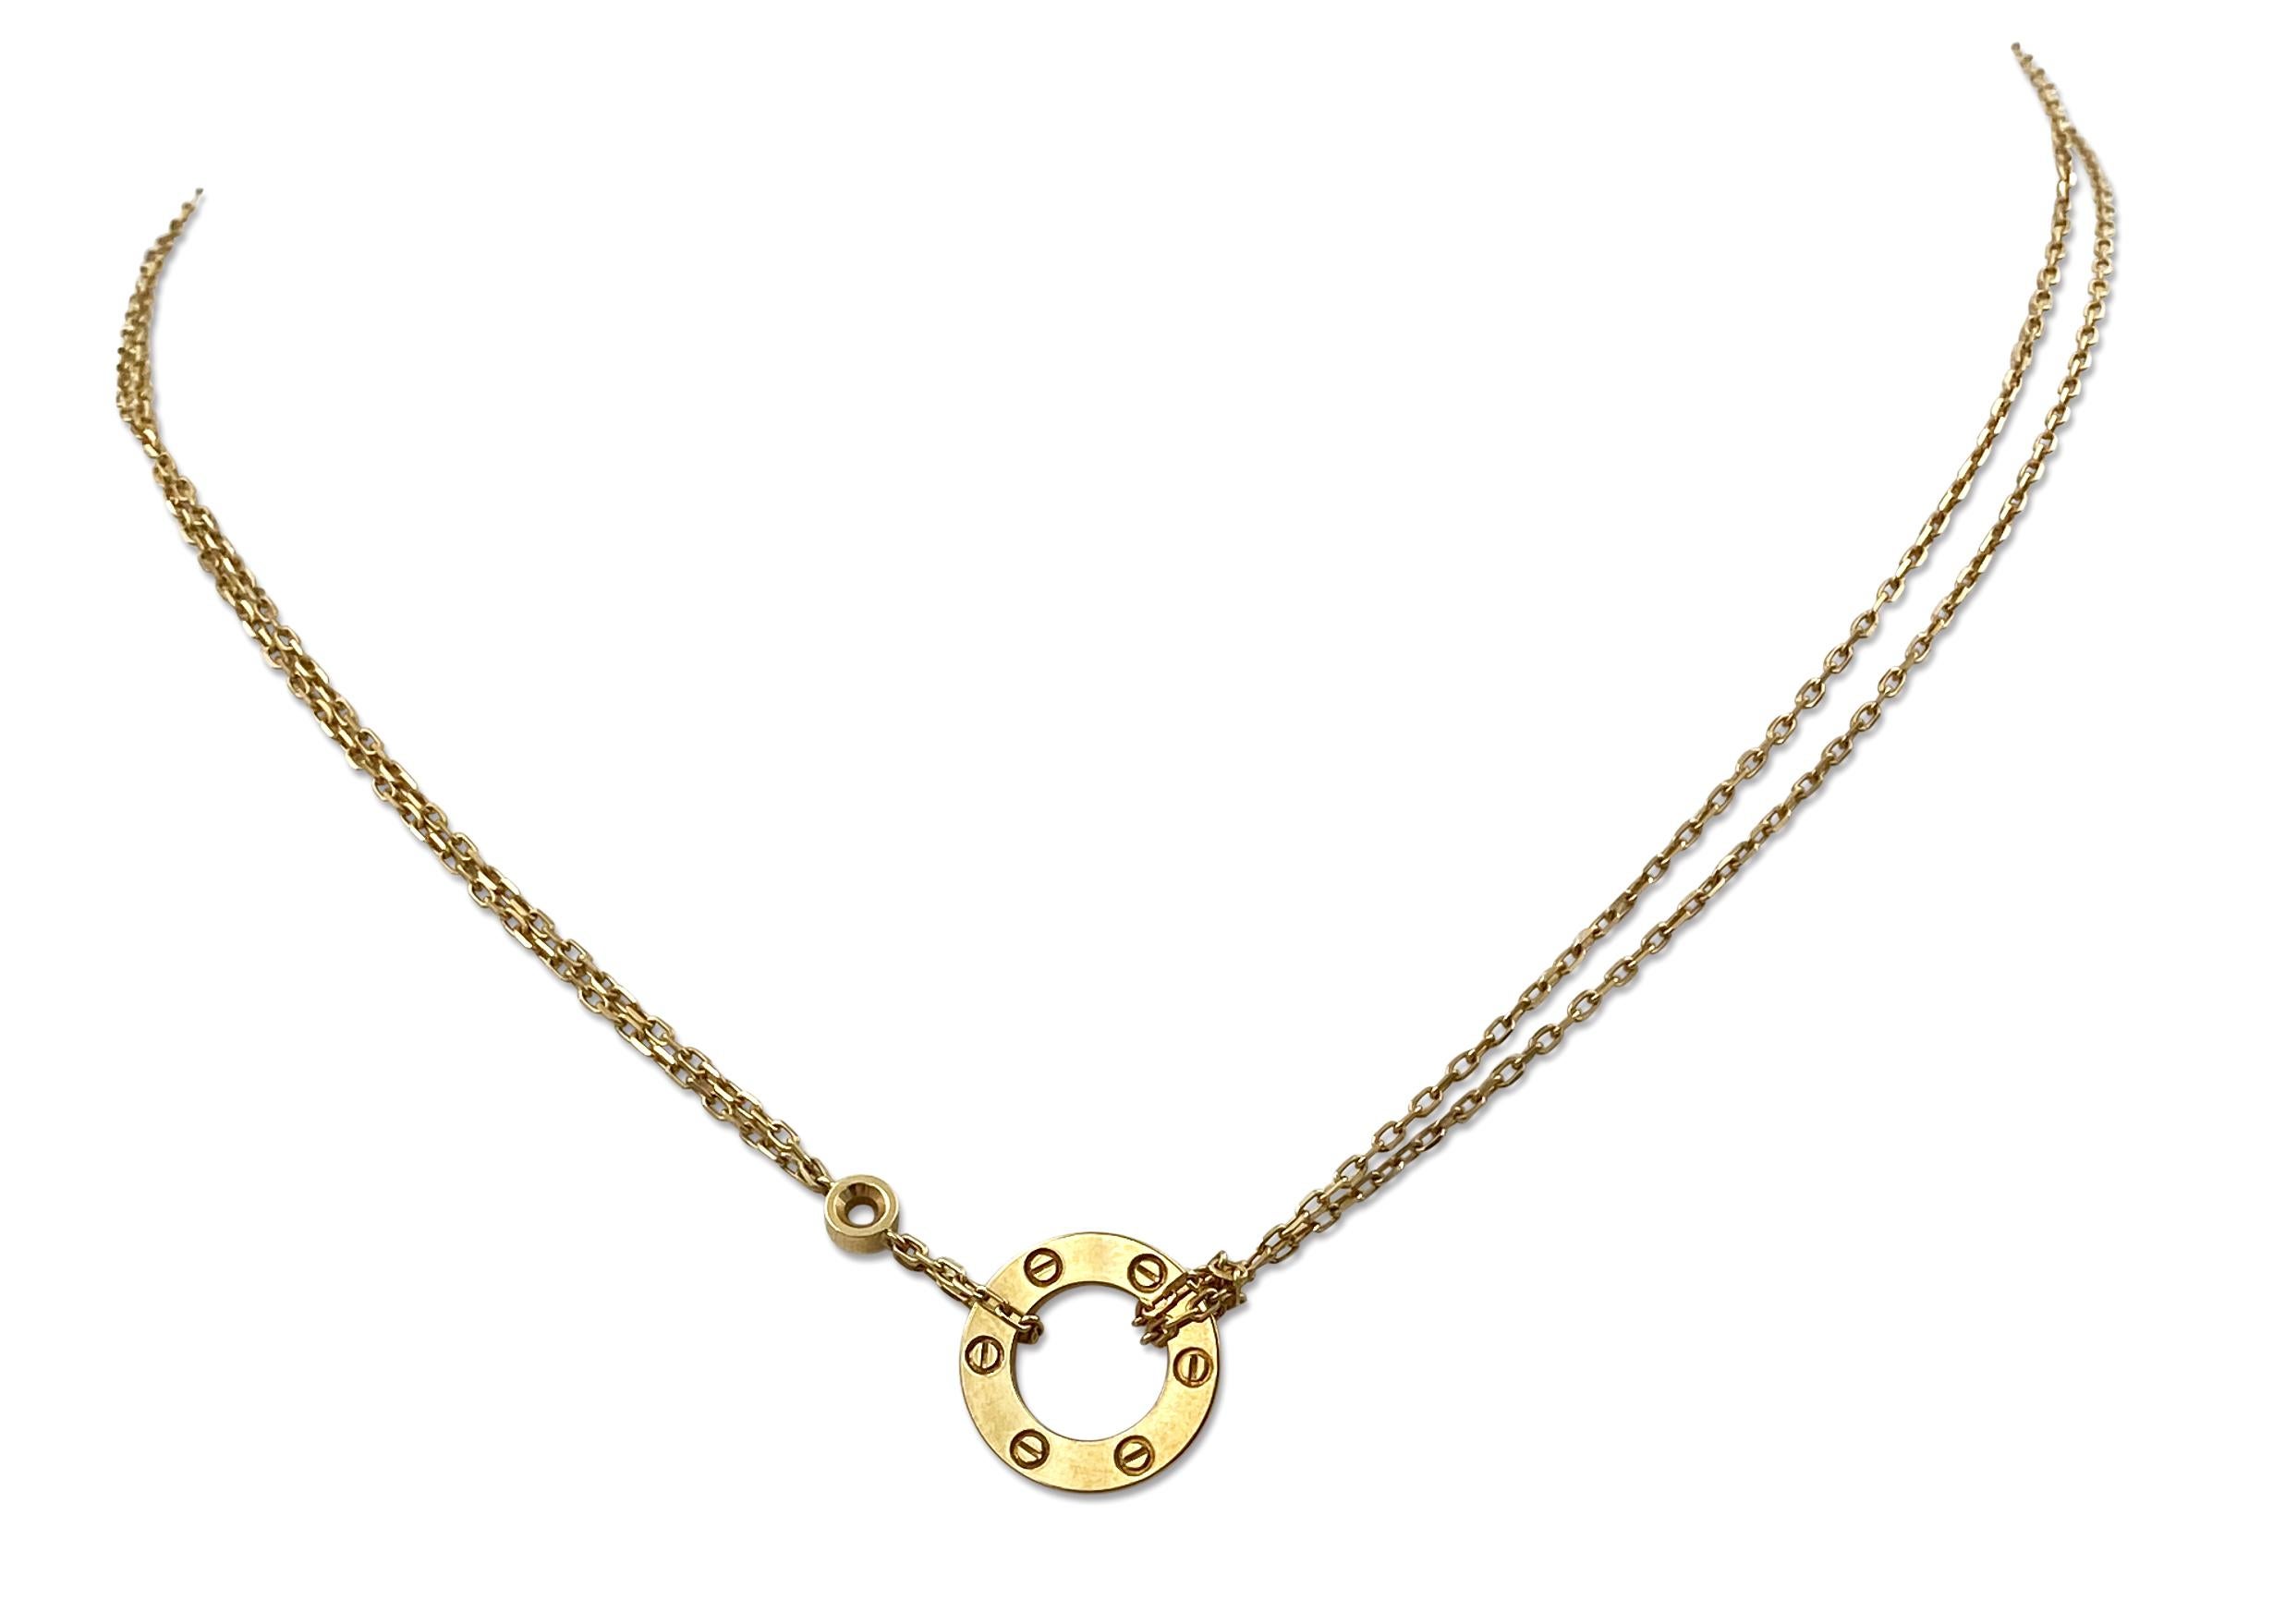 Authentic chain and ring charm necklace from the Cartier Love collection. Made in 18 karat yellow gold and double strand oval link chain with a half inch round ring and screw top motifs set with two round brilliant cut diamonds of approximately 0.30